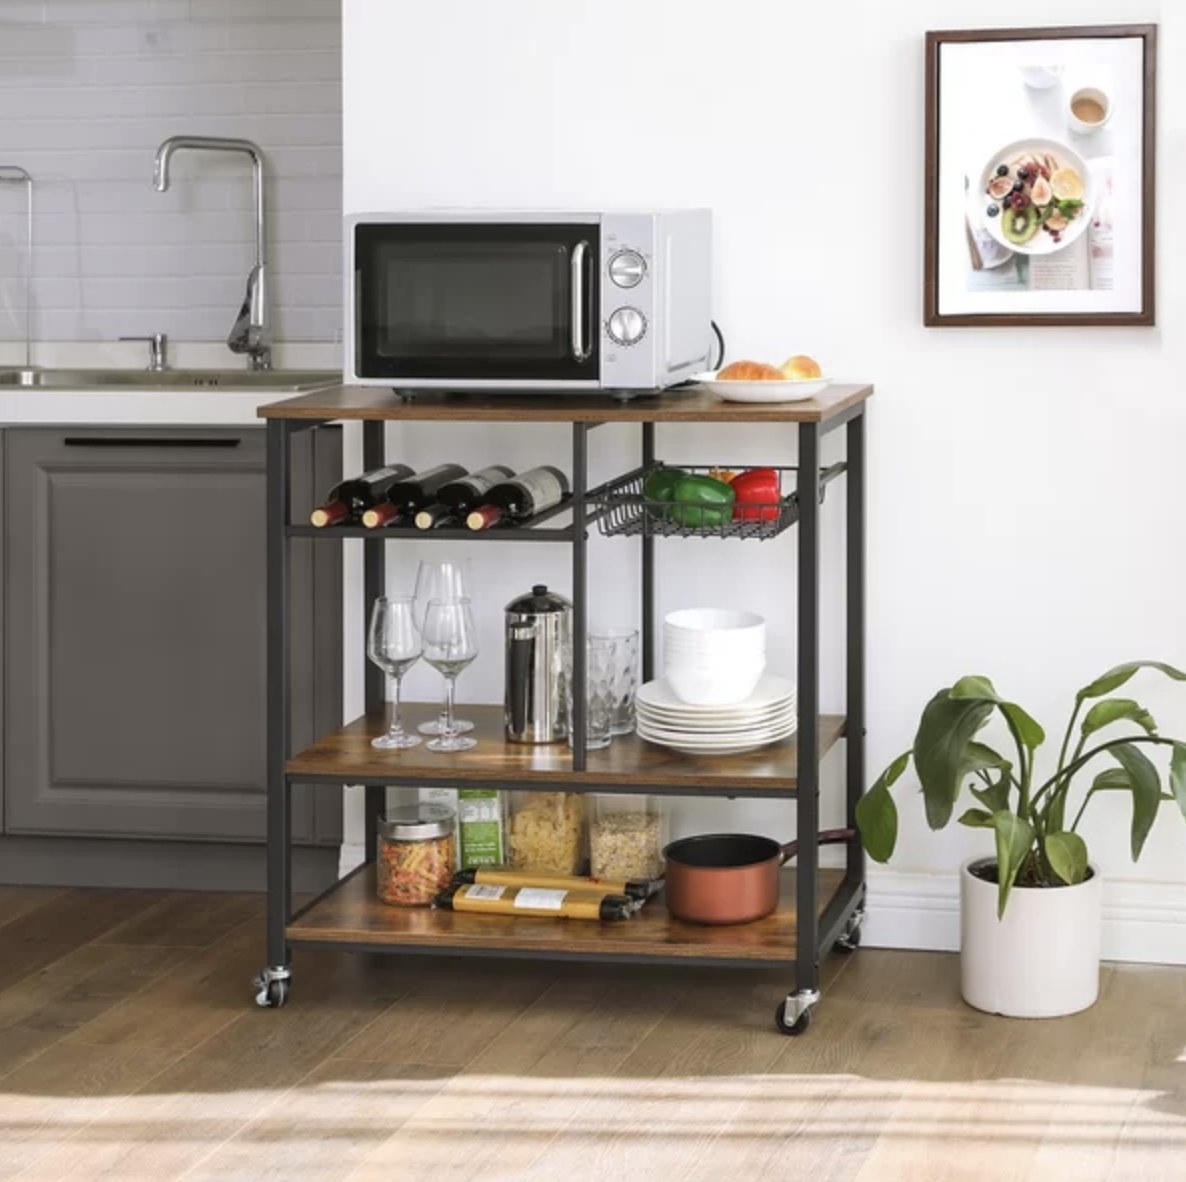 The black and wooden cart has a microwave, wine, serving ware and pasta supplies